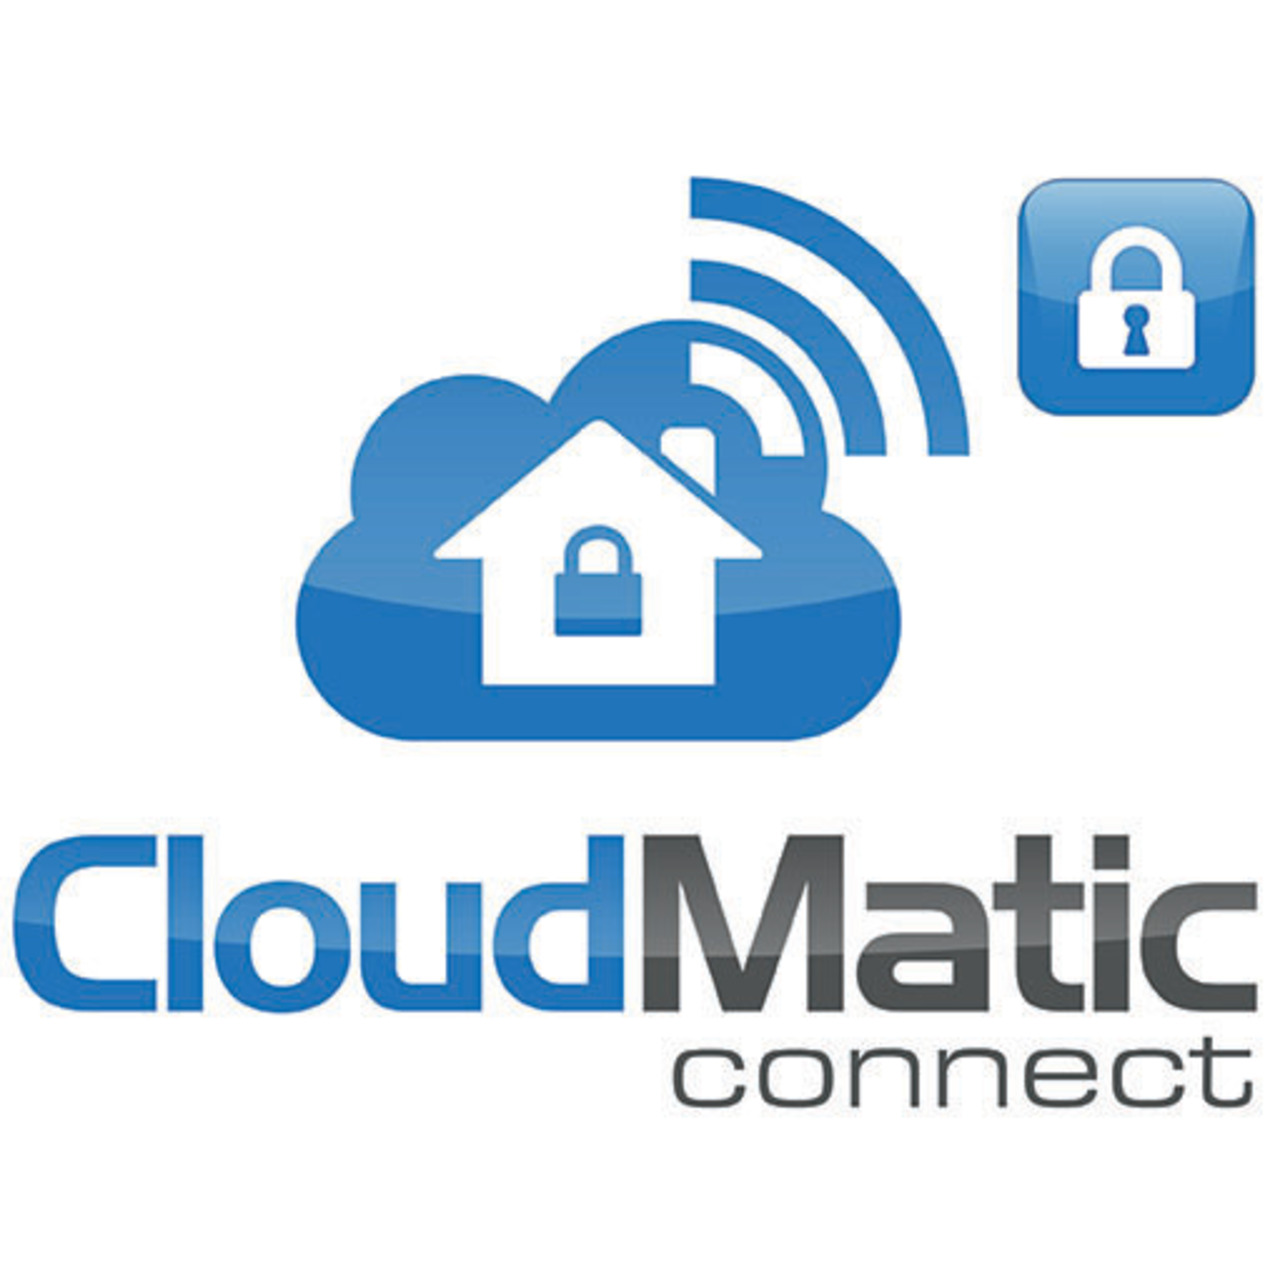 CloudMatic connect- 12 Monate Fernzugang für Homematic Smart Home - Hausautomation unter Hausautomation